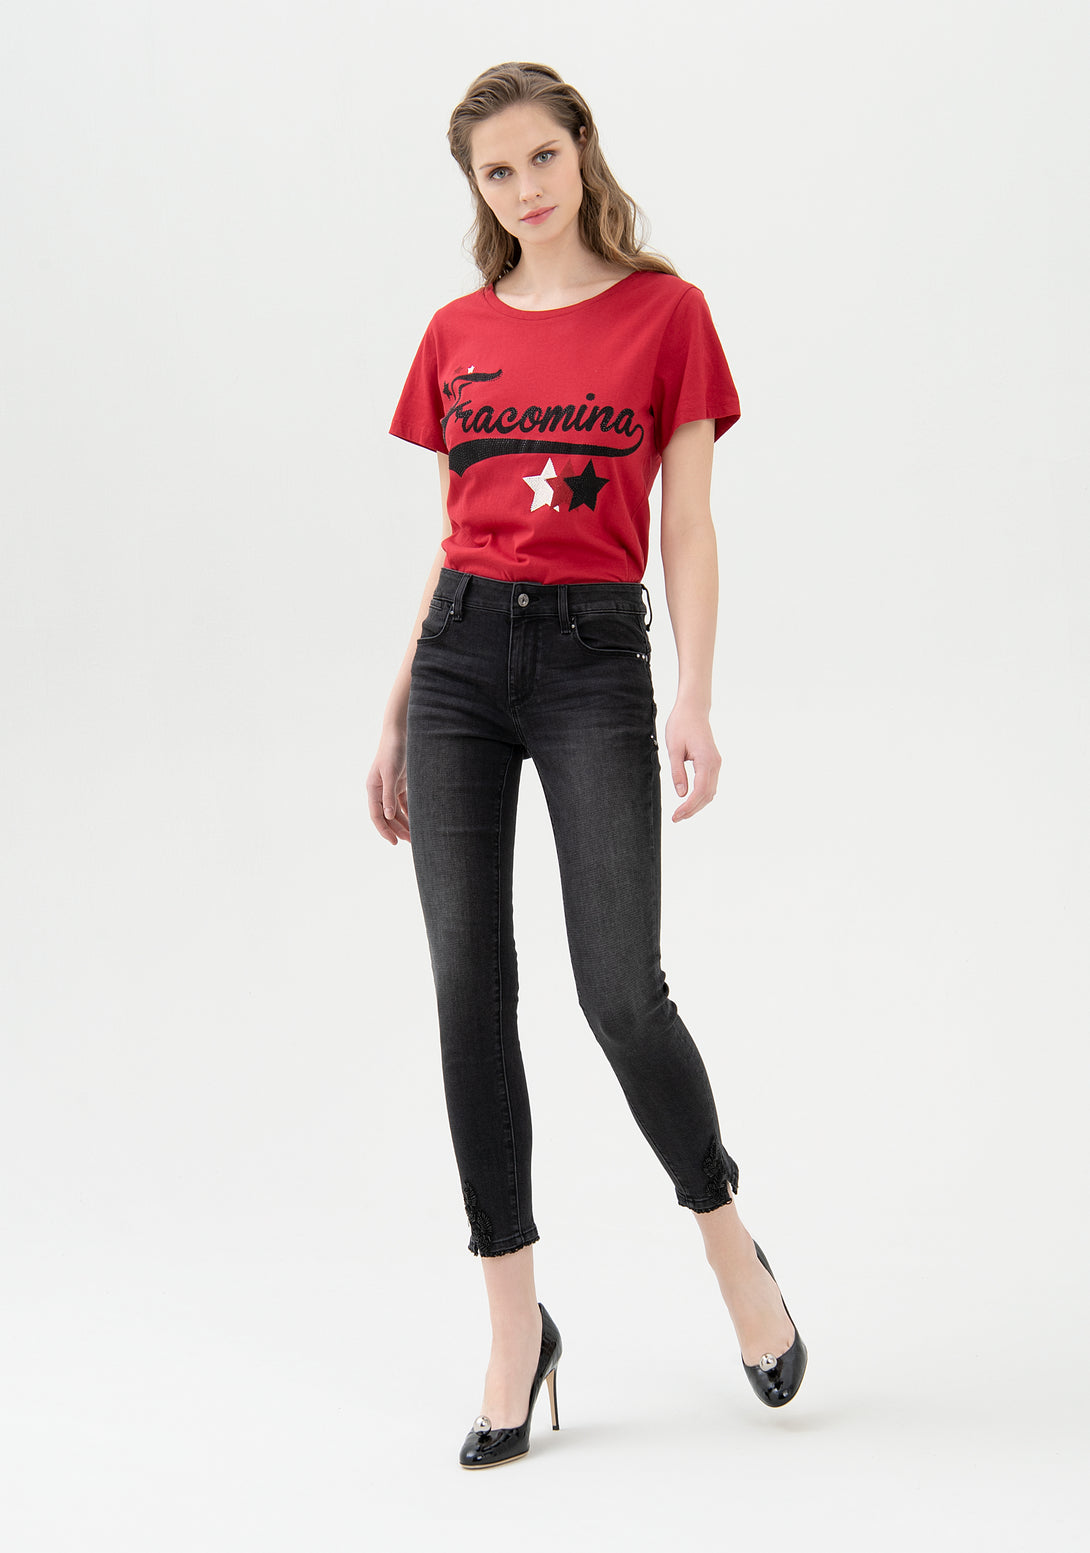 Jeans skinny fit cropped with push-up effect made in denim with dark wash